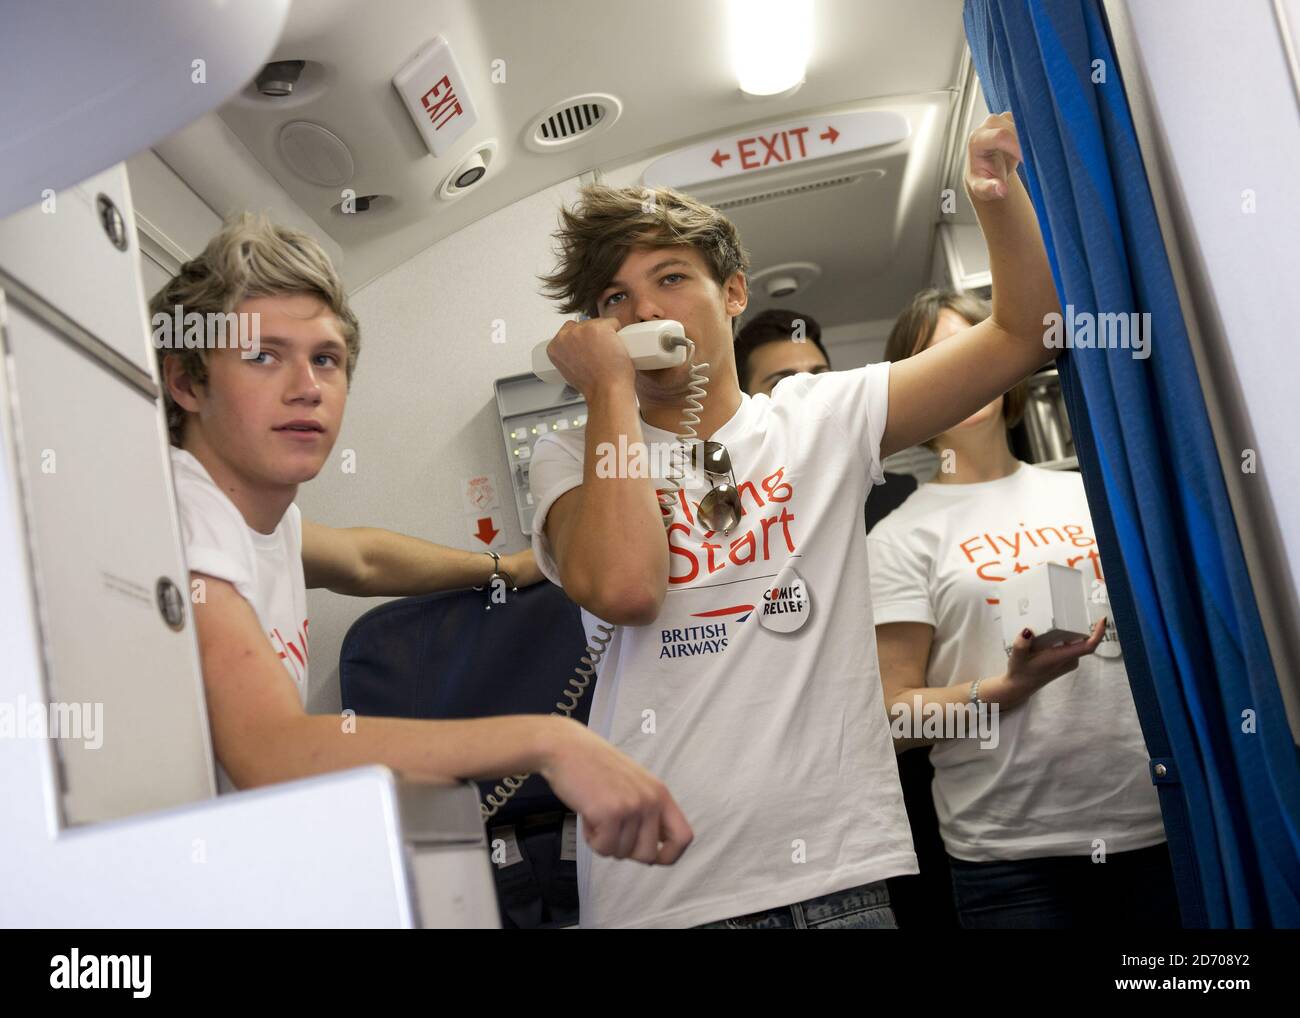 Niall Horan And Louis Tomlinson Of One Direction Conduct A Quiz For Passengers On Board Flight Ba1d A Private Charter Flight From London To Manchester Hosted By The Band For Competition